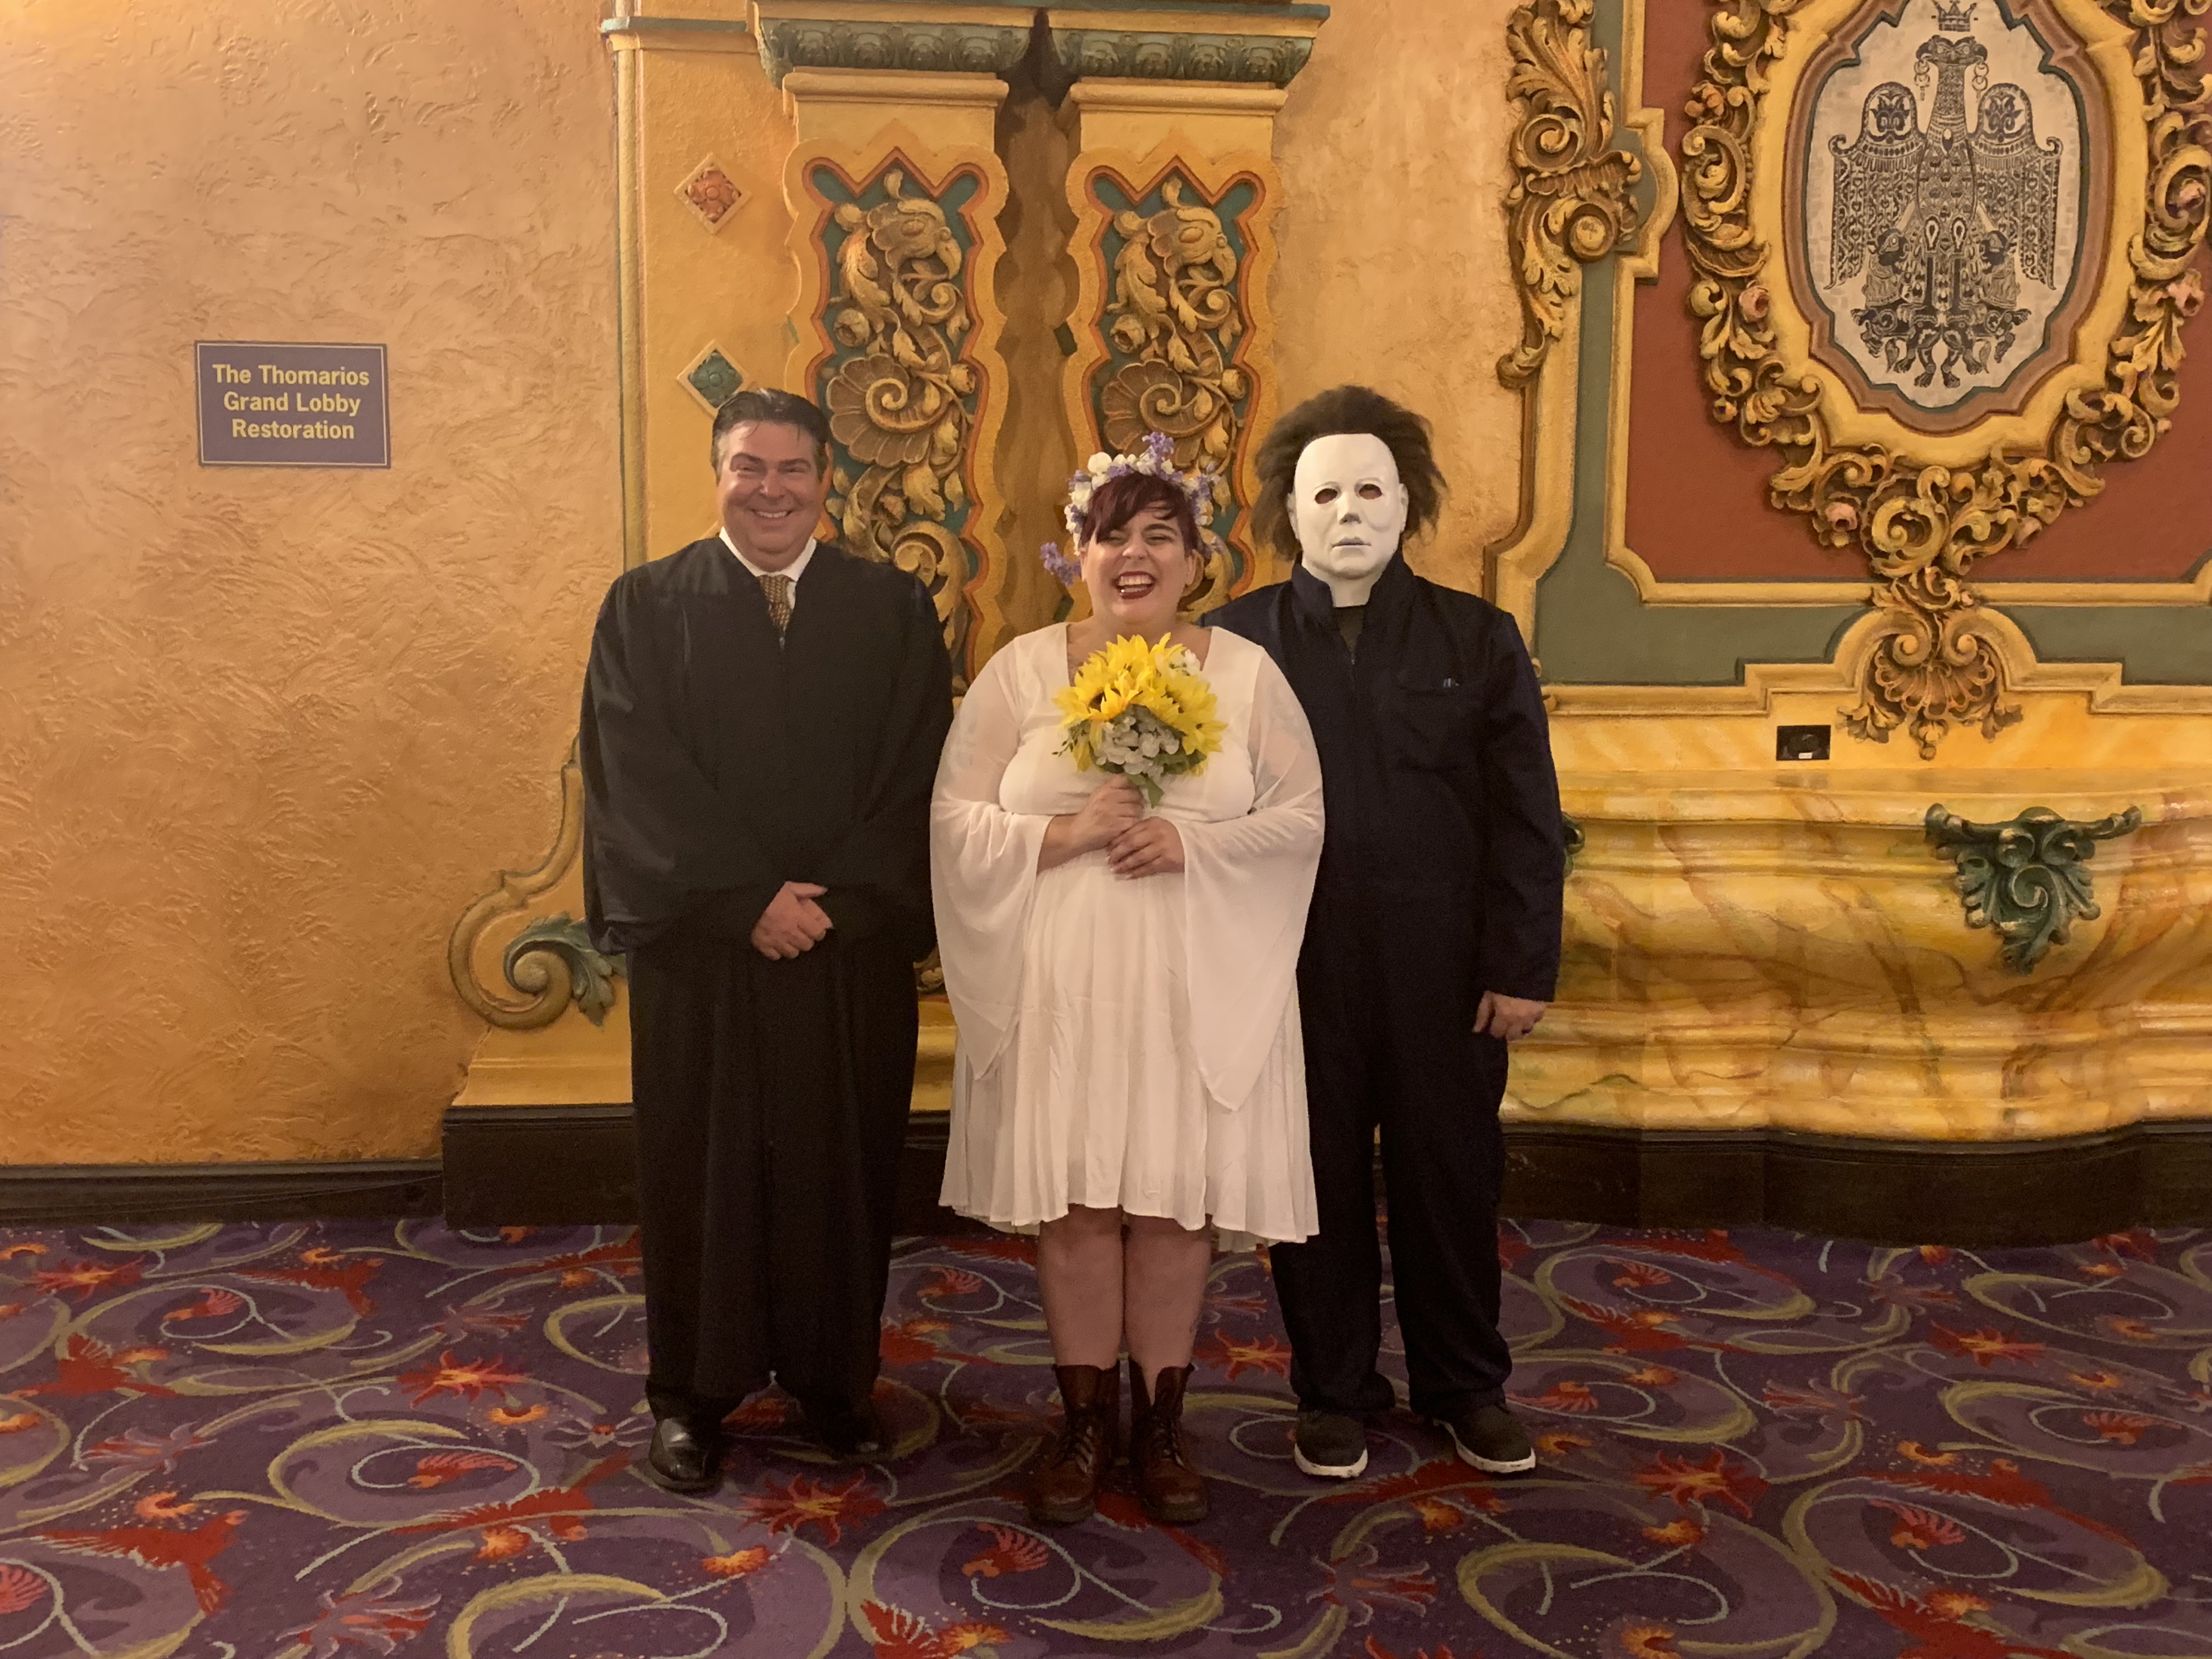 Brittni and Derek Coontz were married by Judge Ron Cable during Halloween themed weddings in 2021 at the Akron Civic Theatre